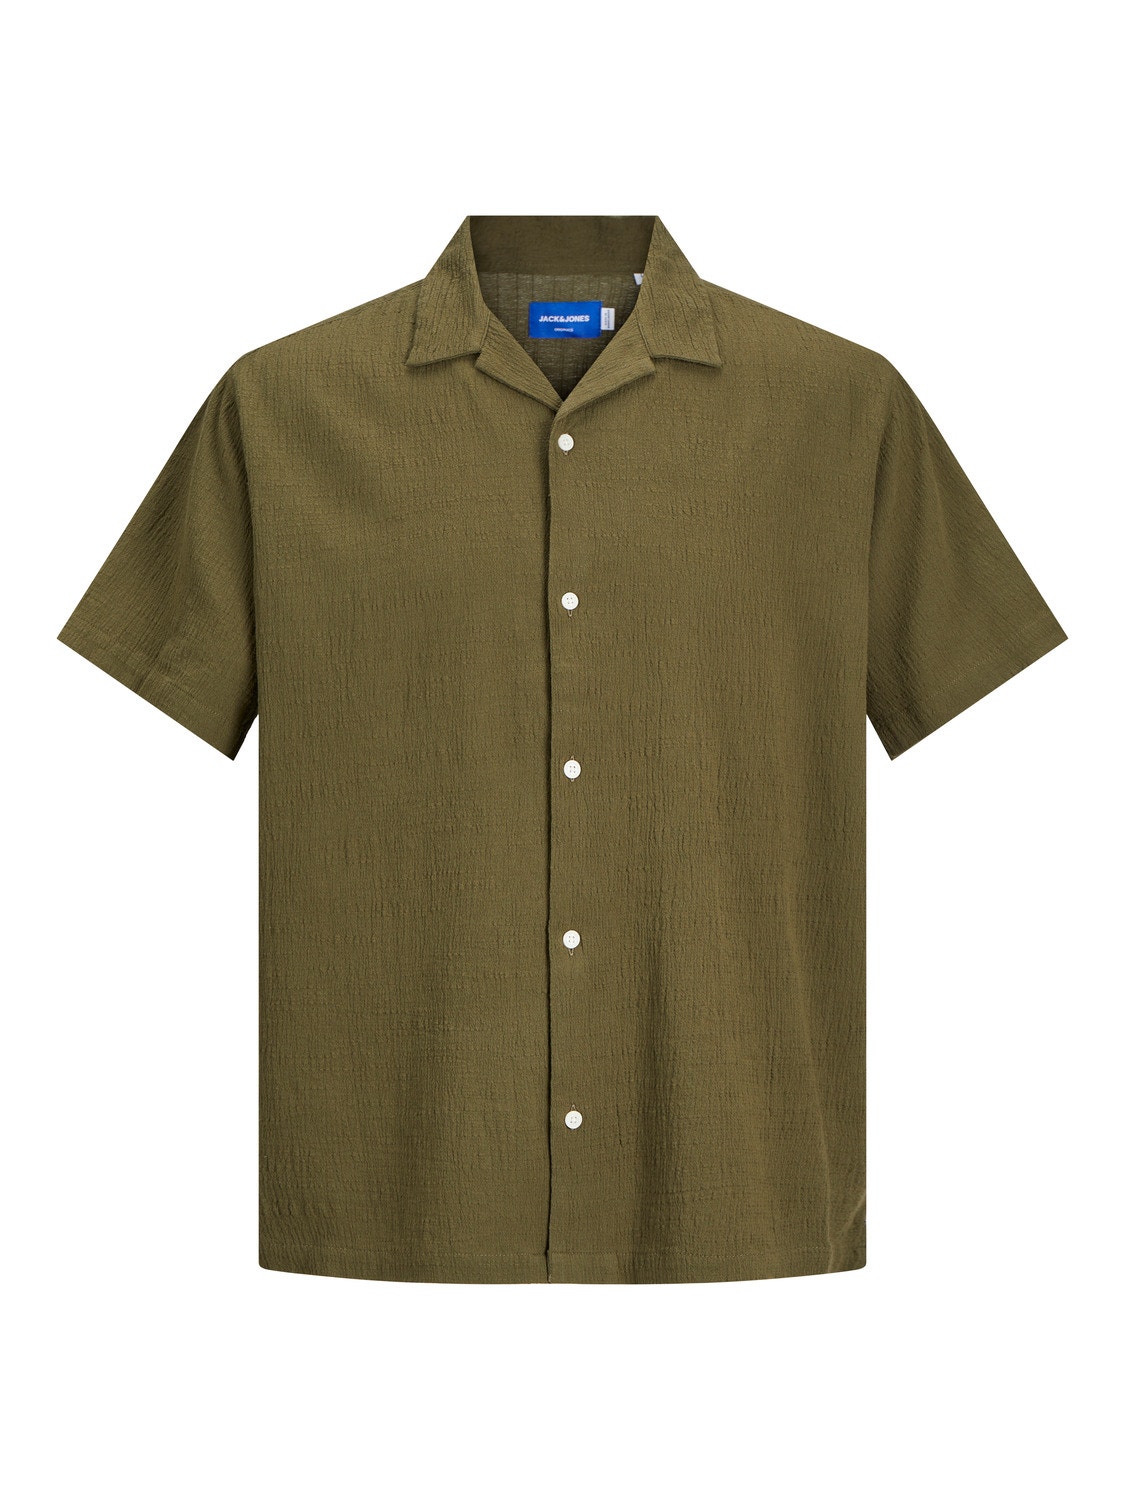 Jack & Jones Stile Hawaiano Relaxed Fit -Olive Night - 12255781